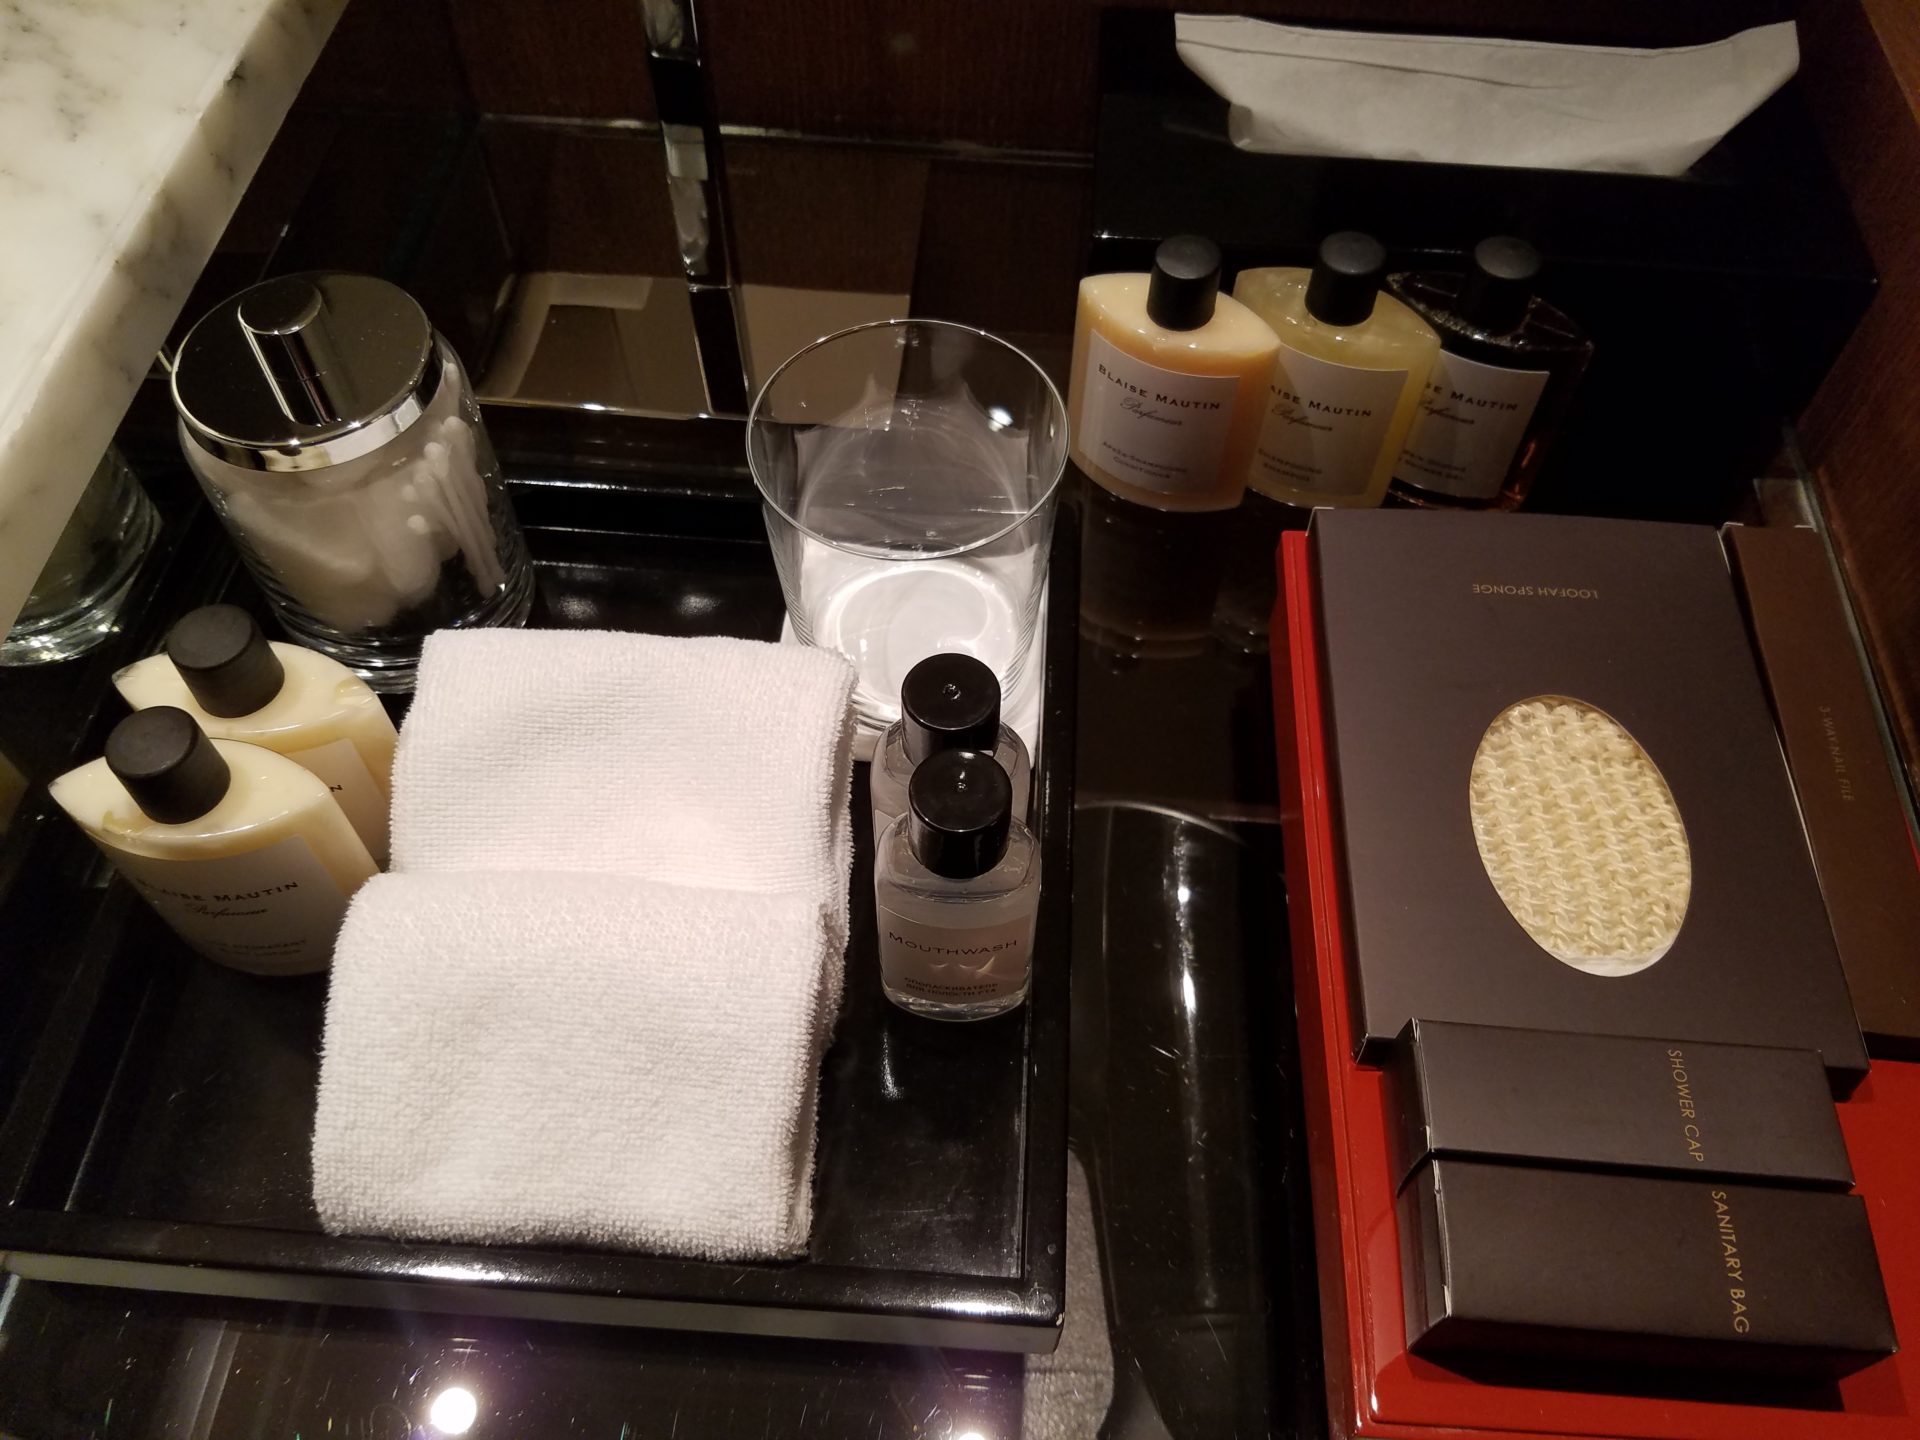 a group of toiletries and towels on a counter